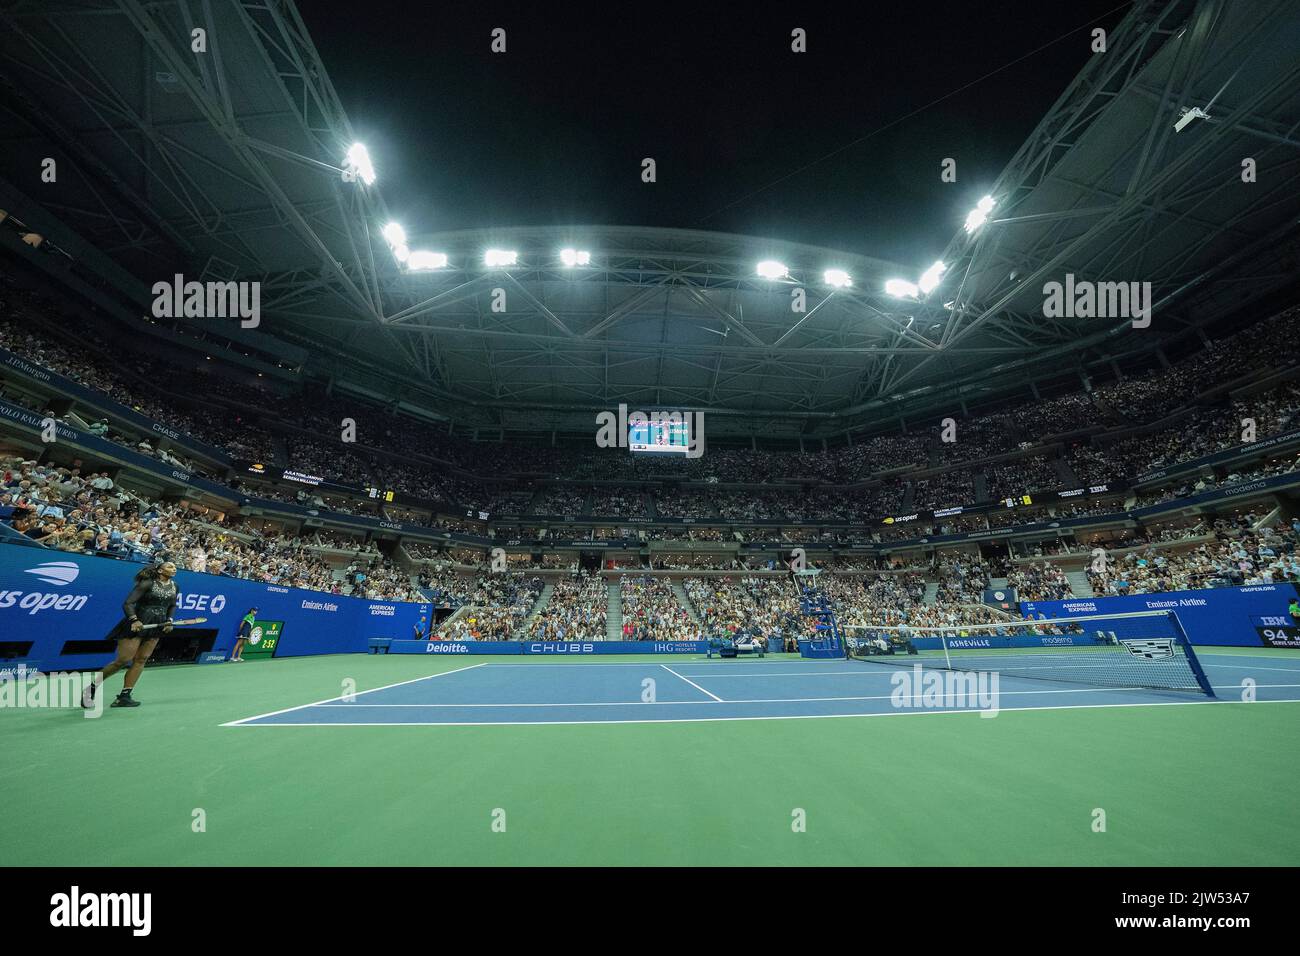 Sept. 2, 2022; New York, NY, USA; General view of Arthur Ashe Stadium during Serena Williams (USA) in her last match against Ajla Tomljanovic (AUS) on day five of the 2022 US Open. Photo by Susan Mullane/Alamy News Live Stock Photo